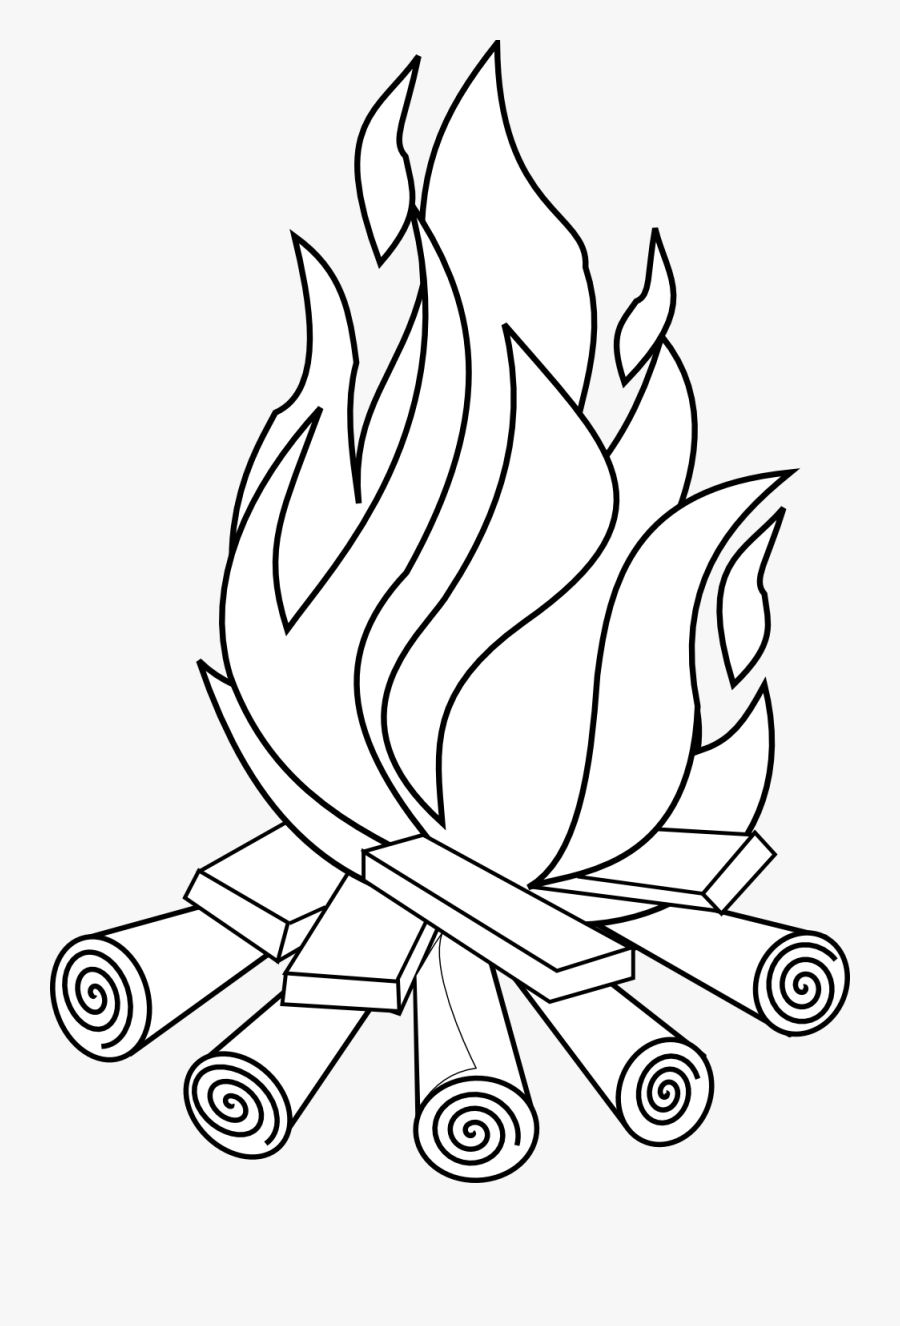 Fire Line Drawing, Transparent Clipart